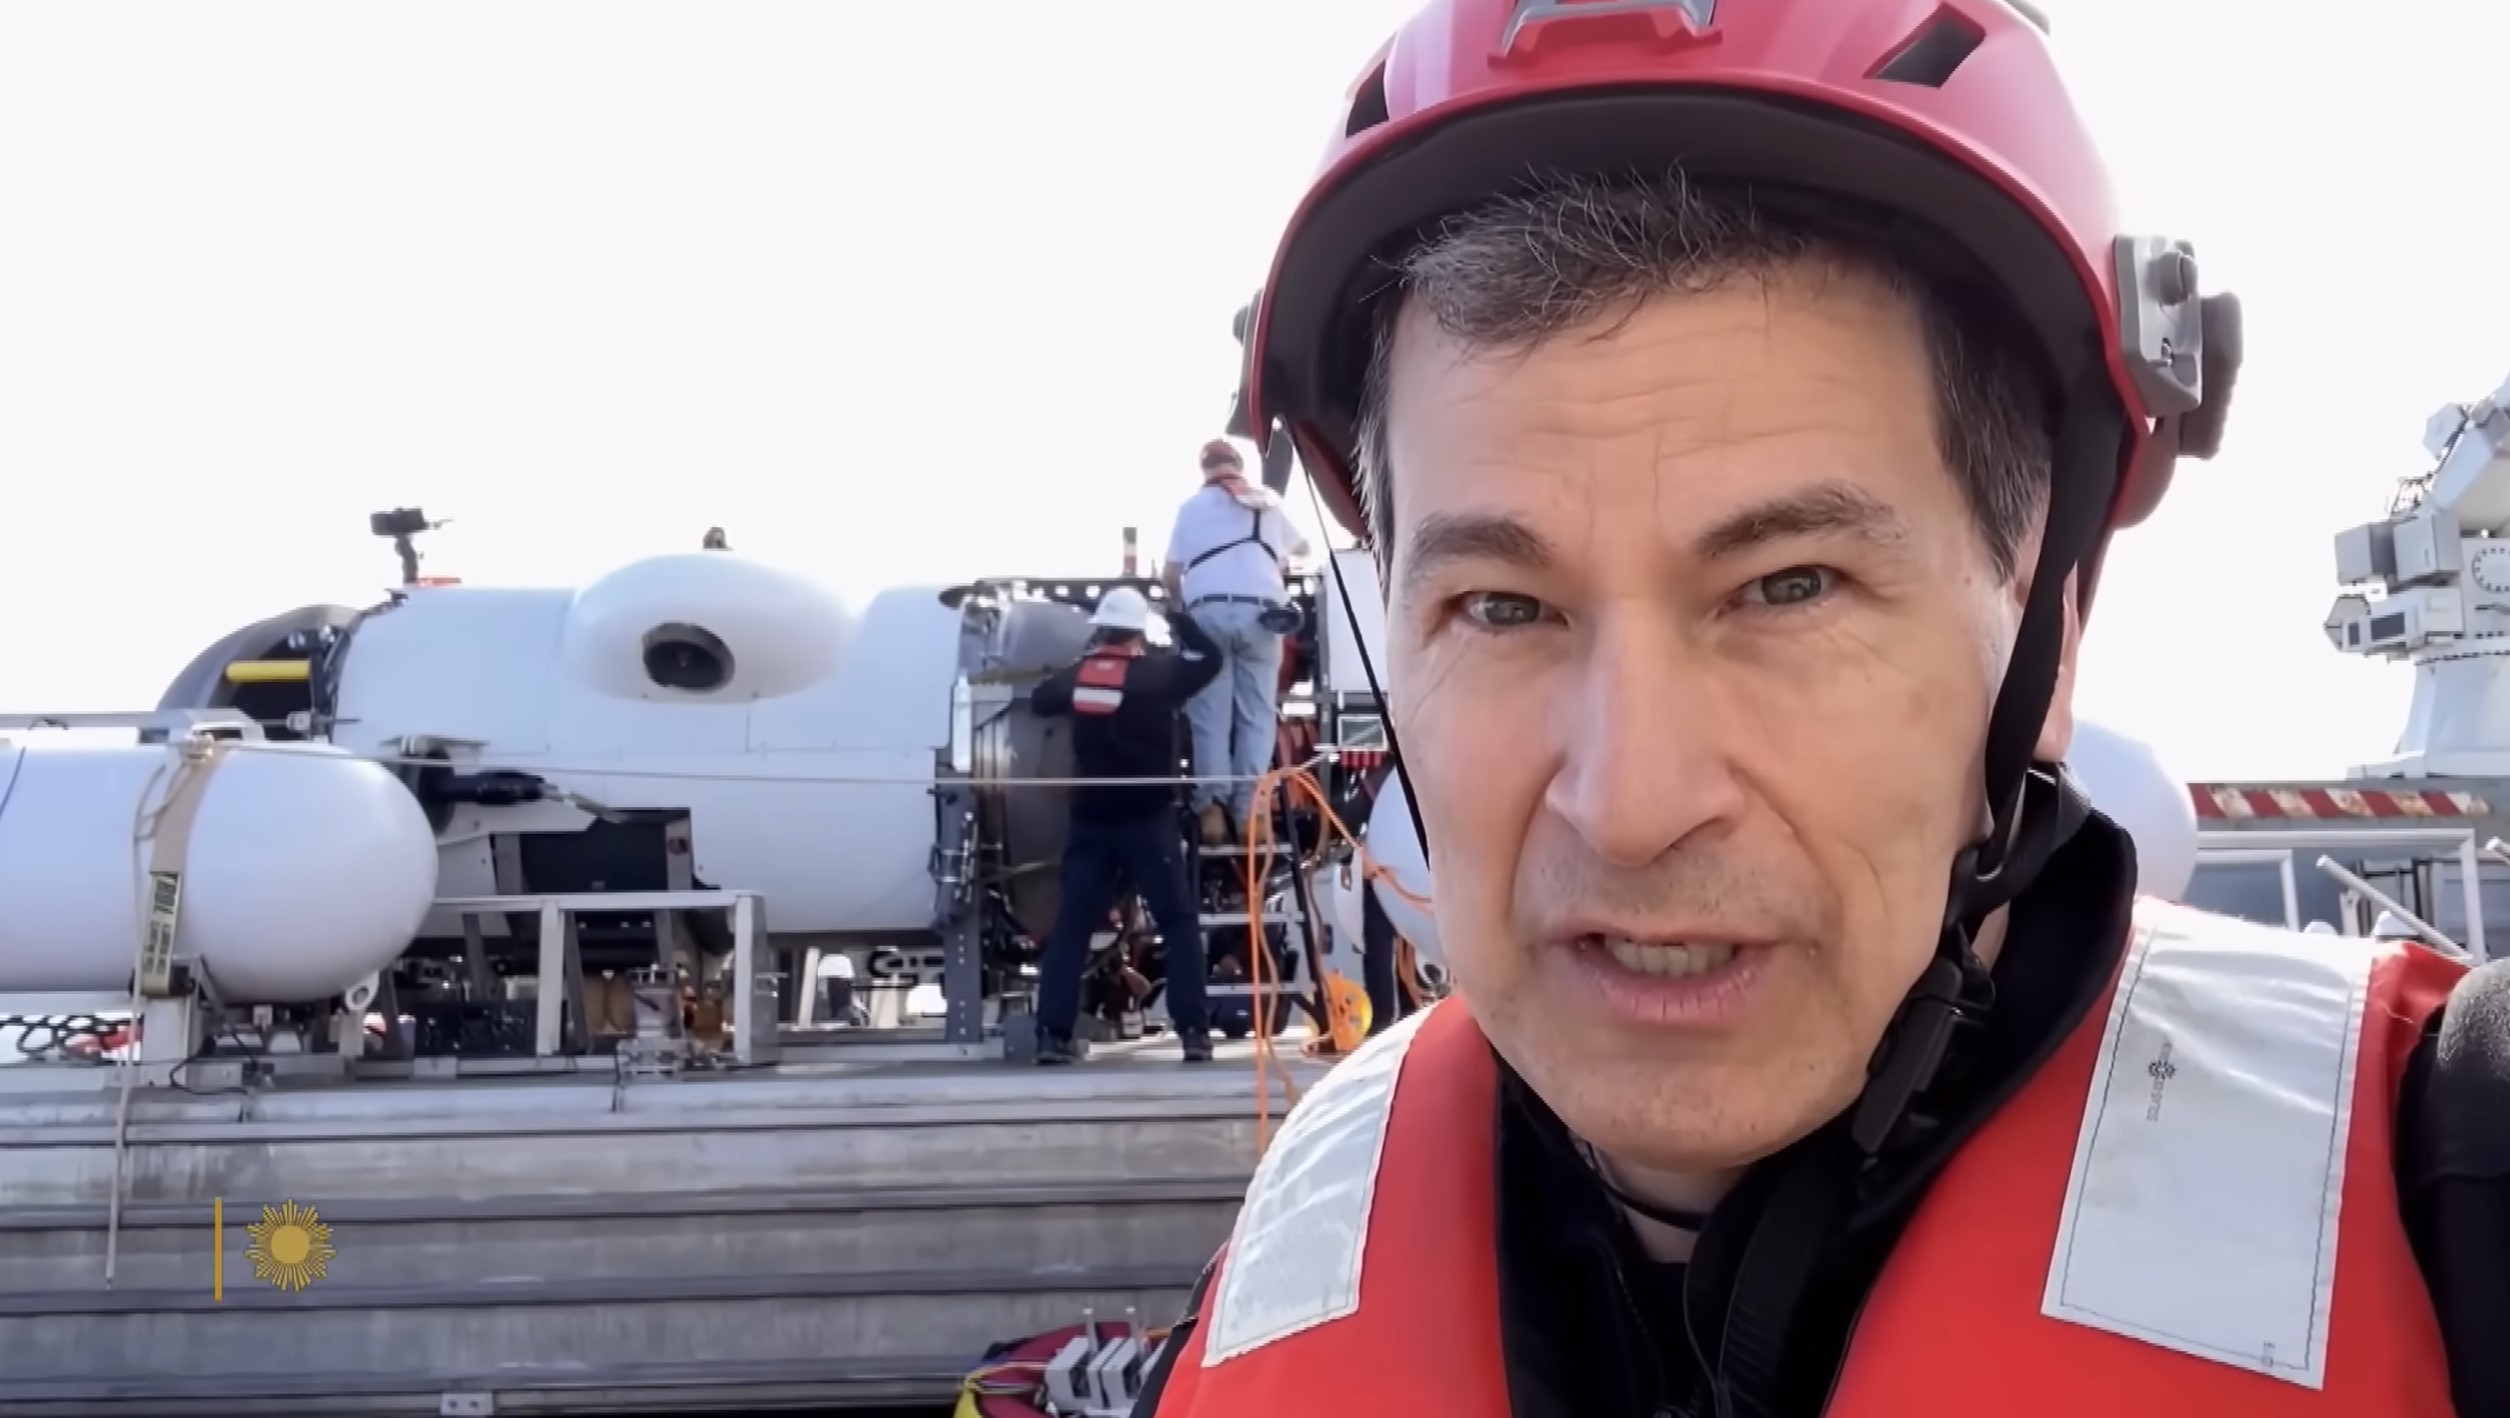 CBS reporter David Pogue also spent time on the Titan